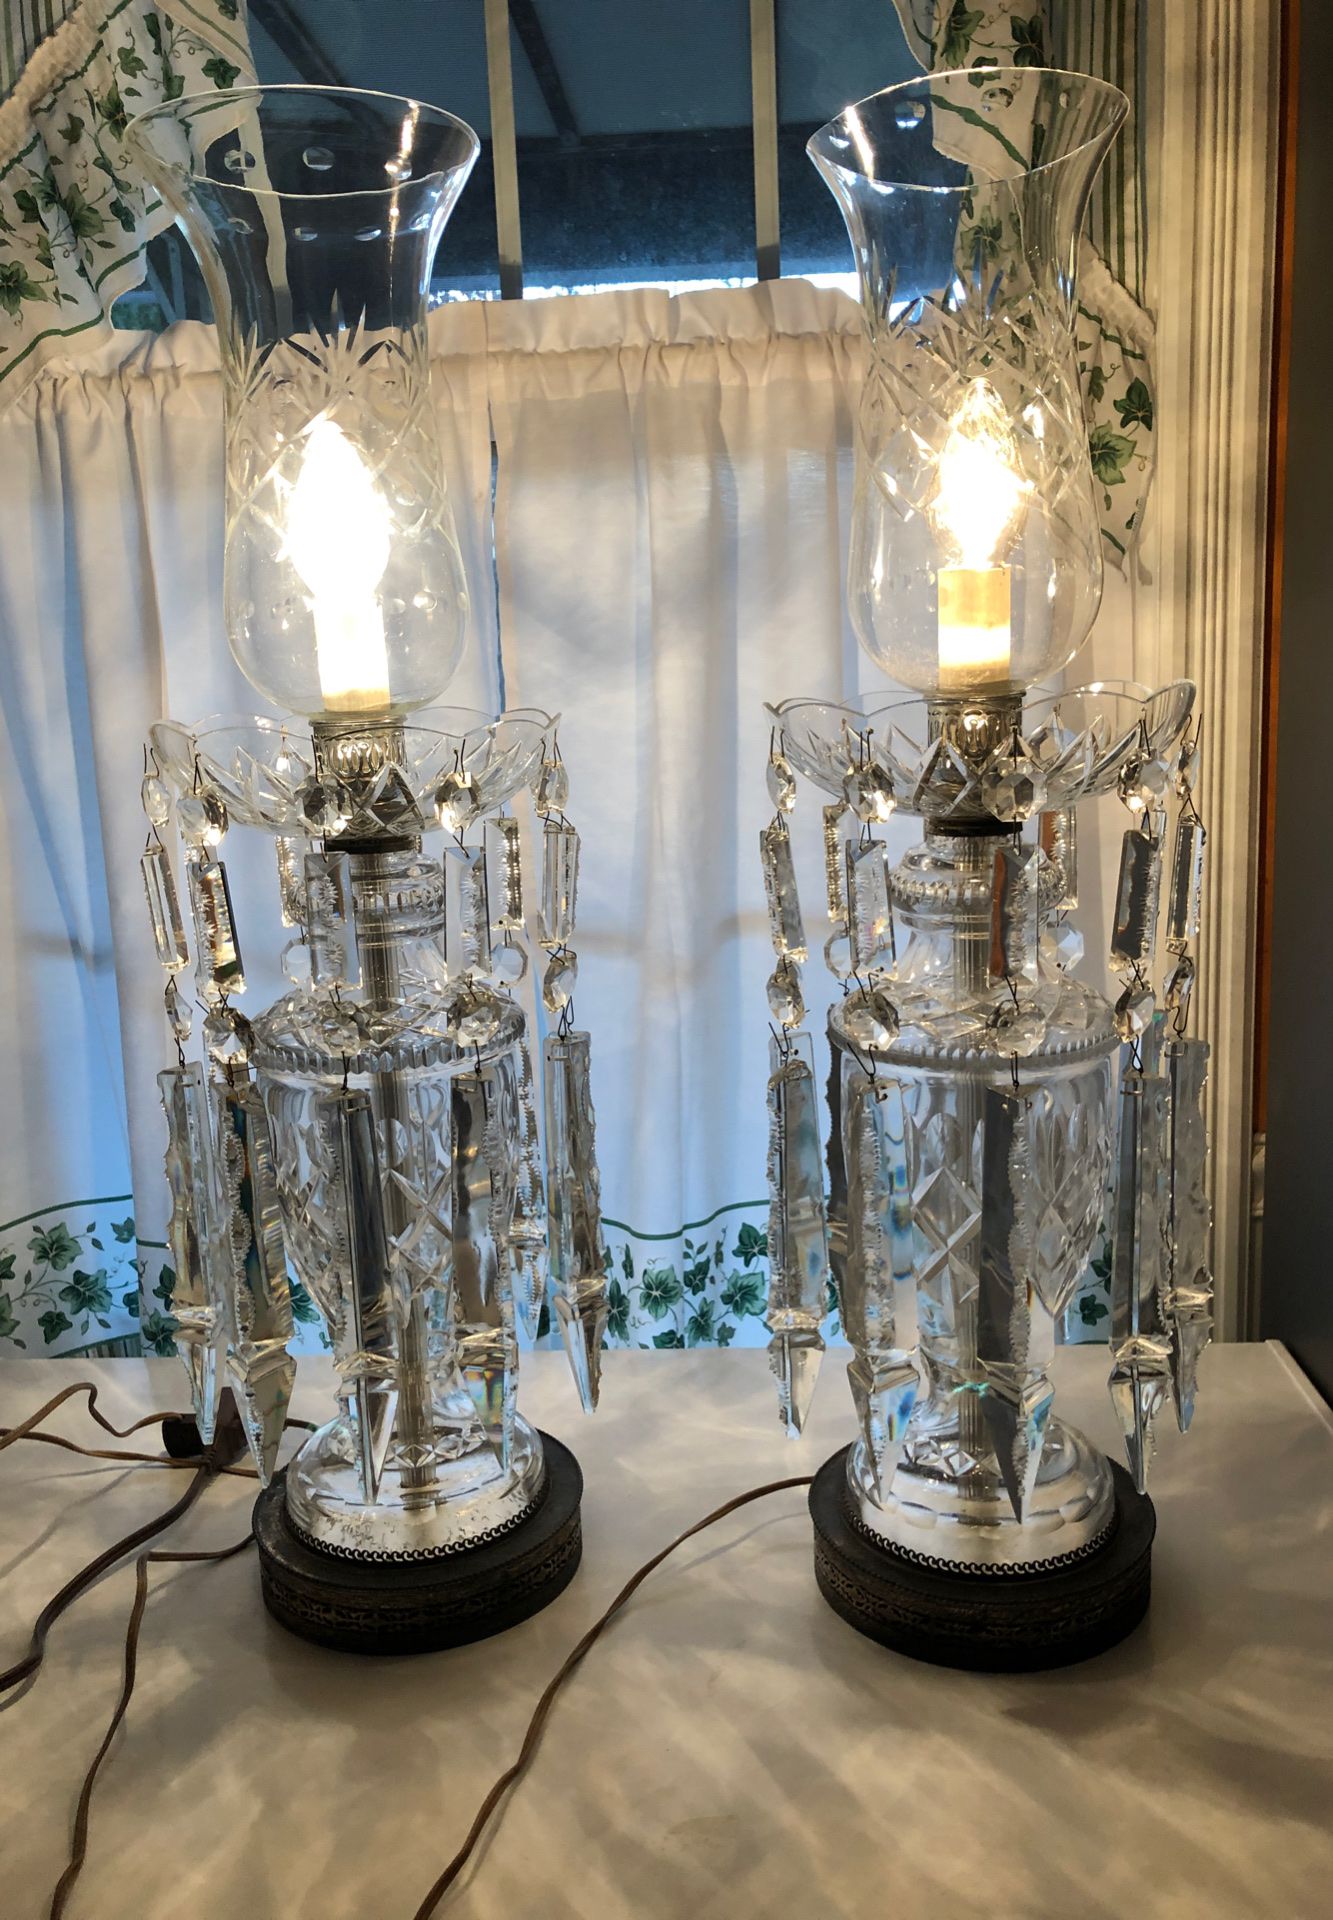 Two vintage woman’s bedroom lamps from1920s rare